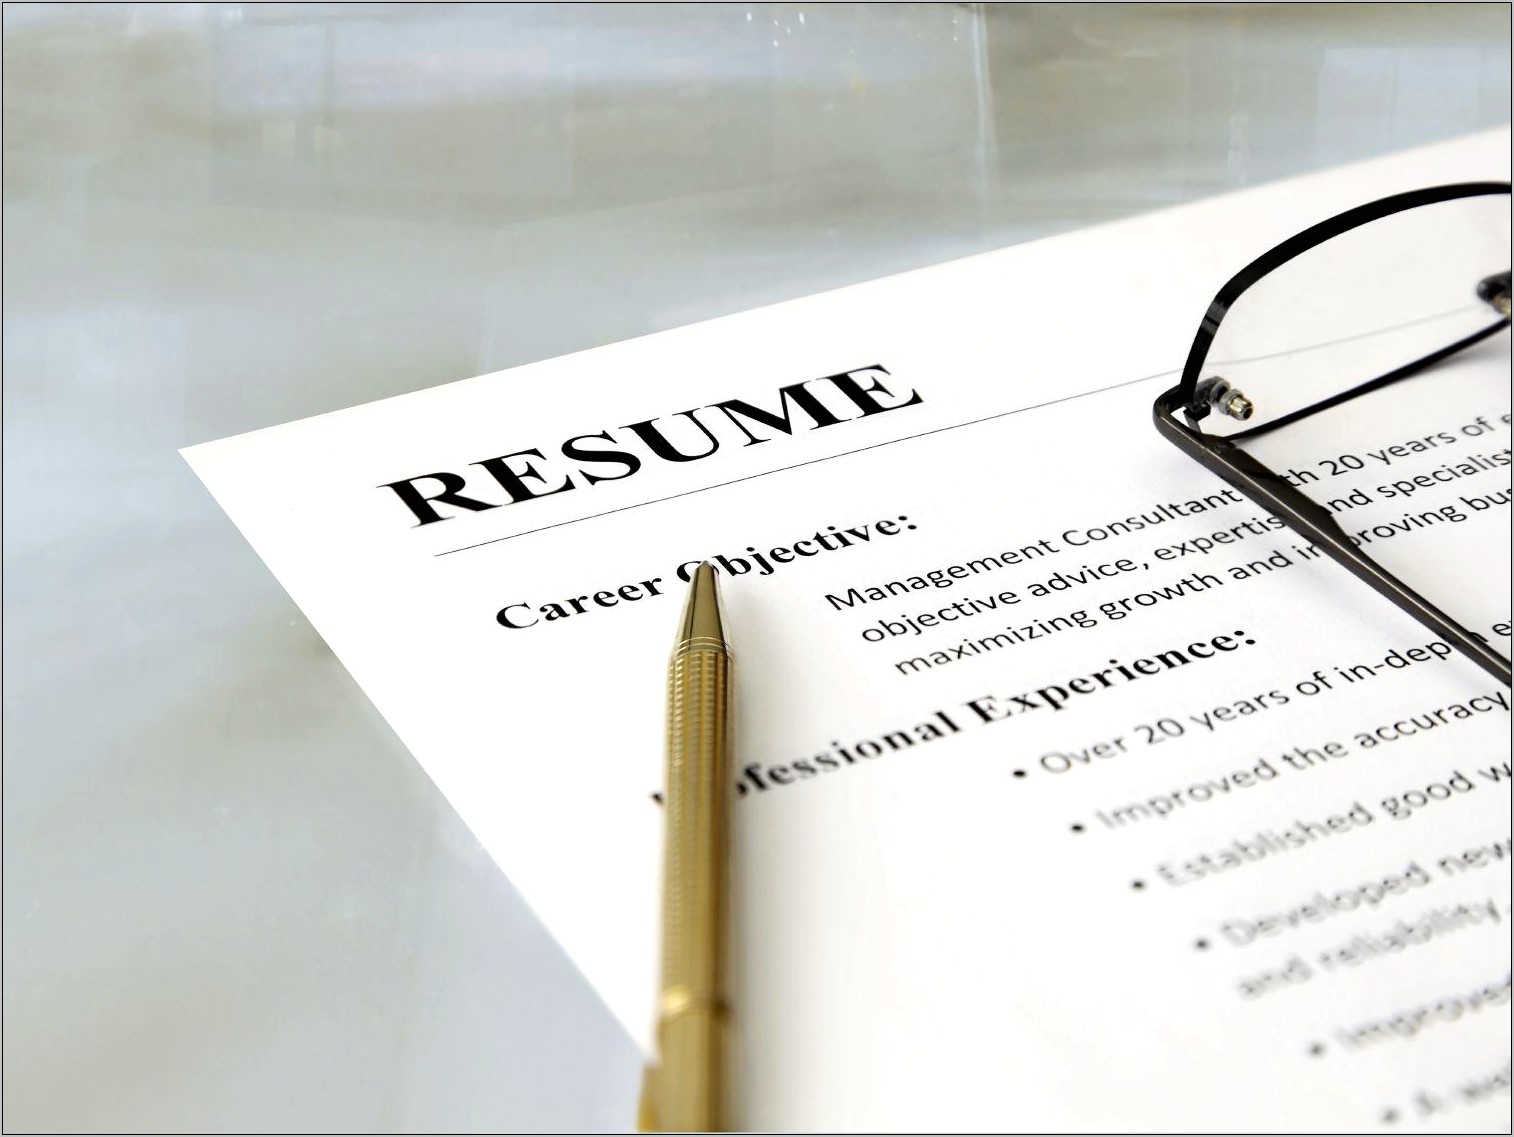 Best Objective Statements For Bartending Resume